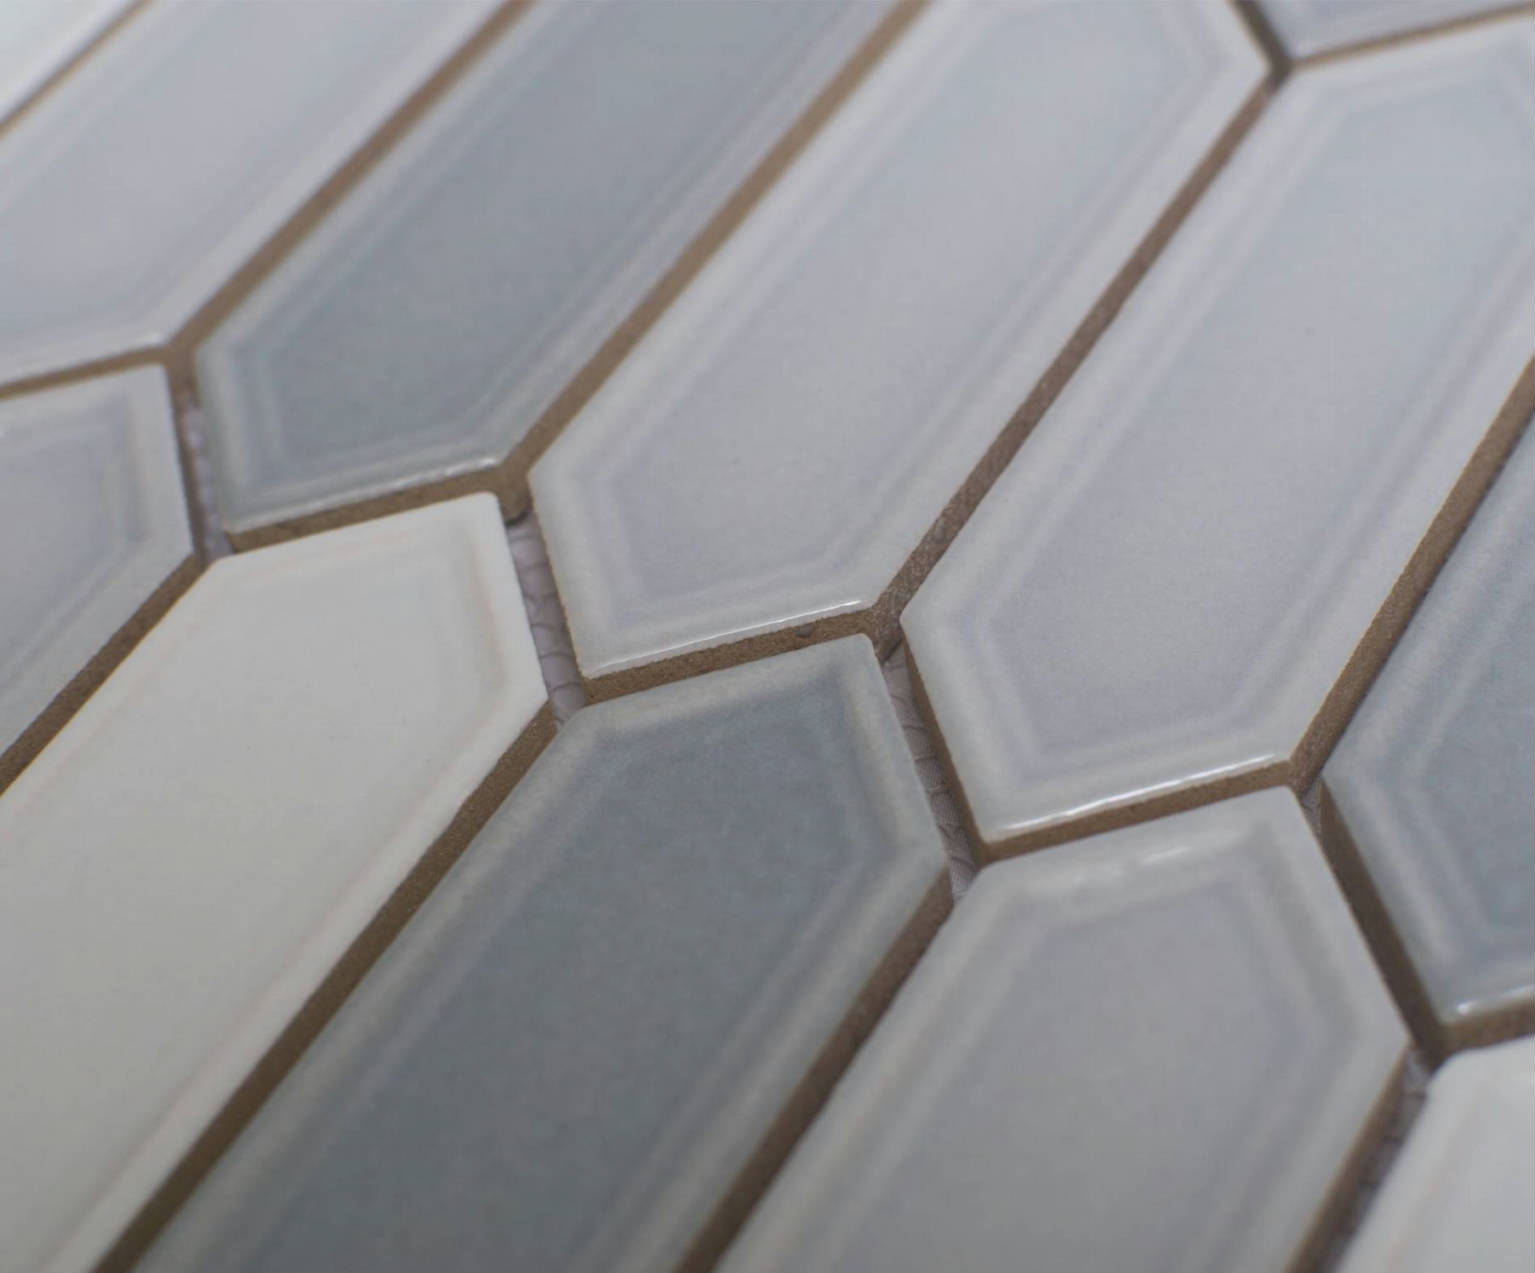 QSSPK-101112 | Stones And More | Finest selection of Mosaics, Glass, Tile and Stone